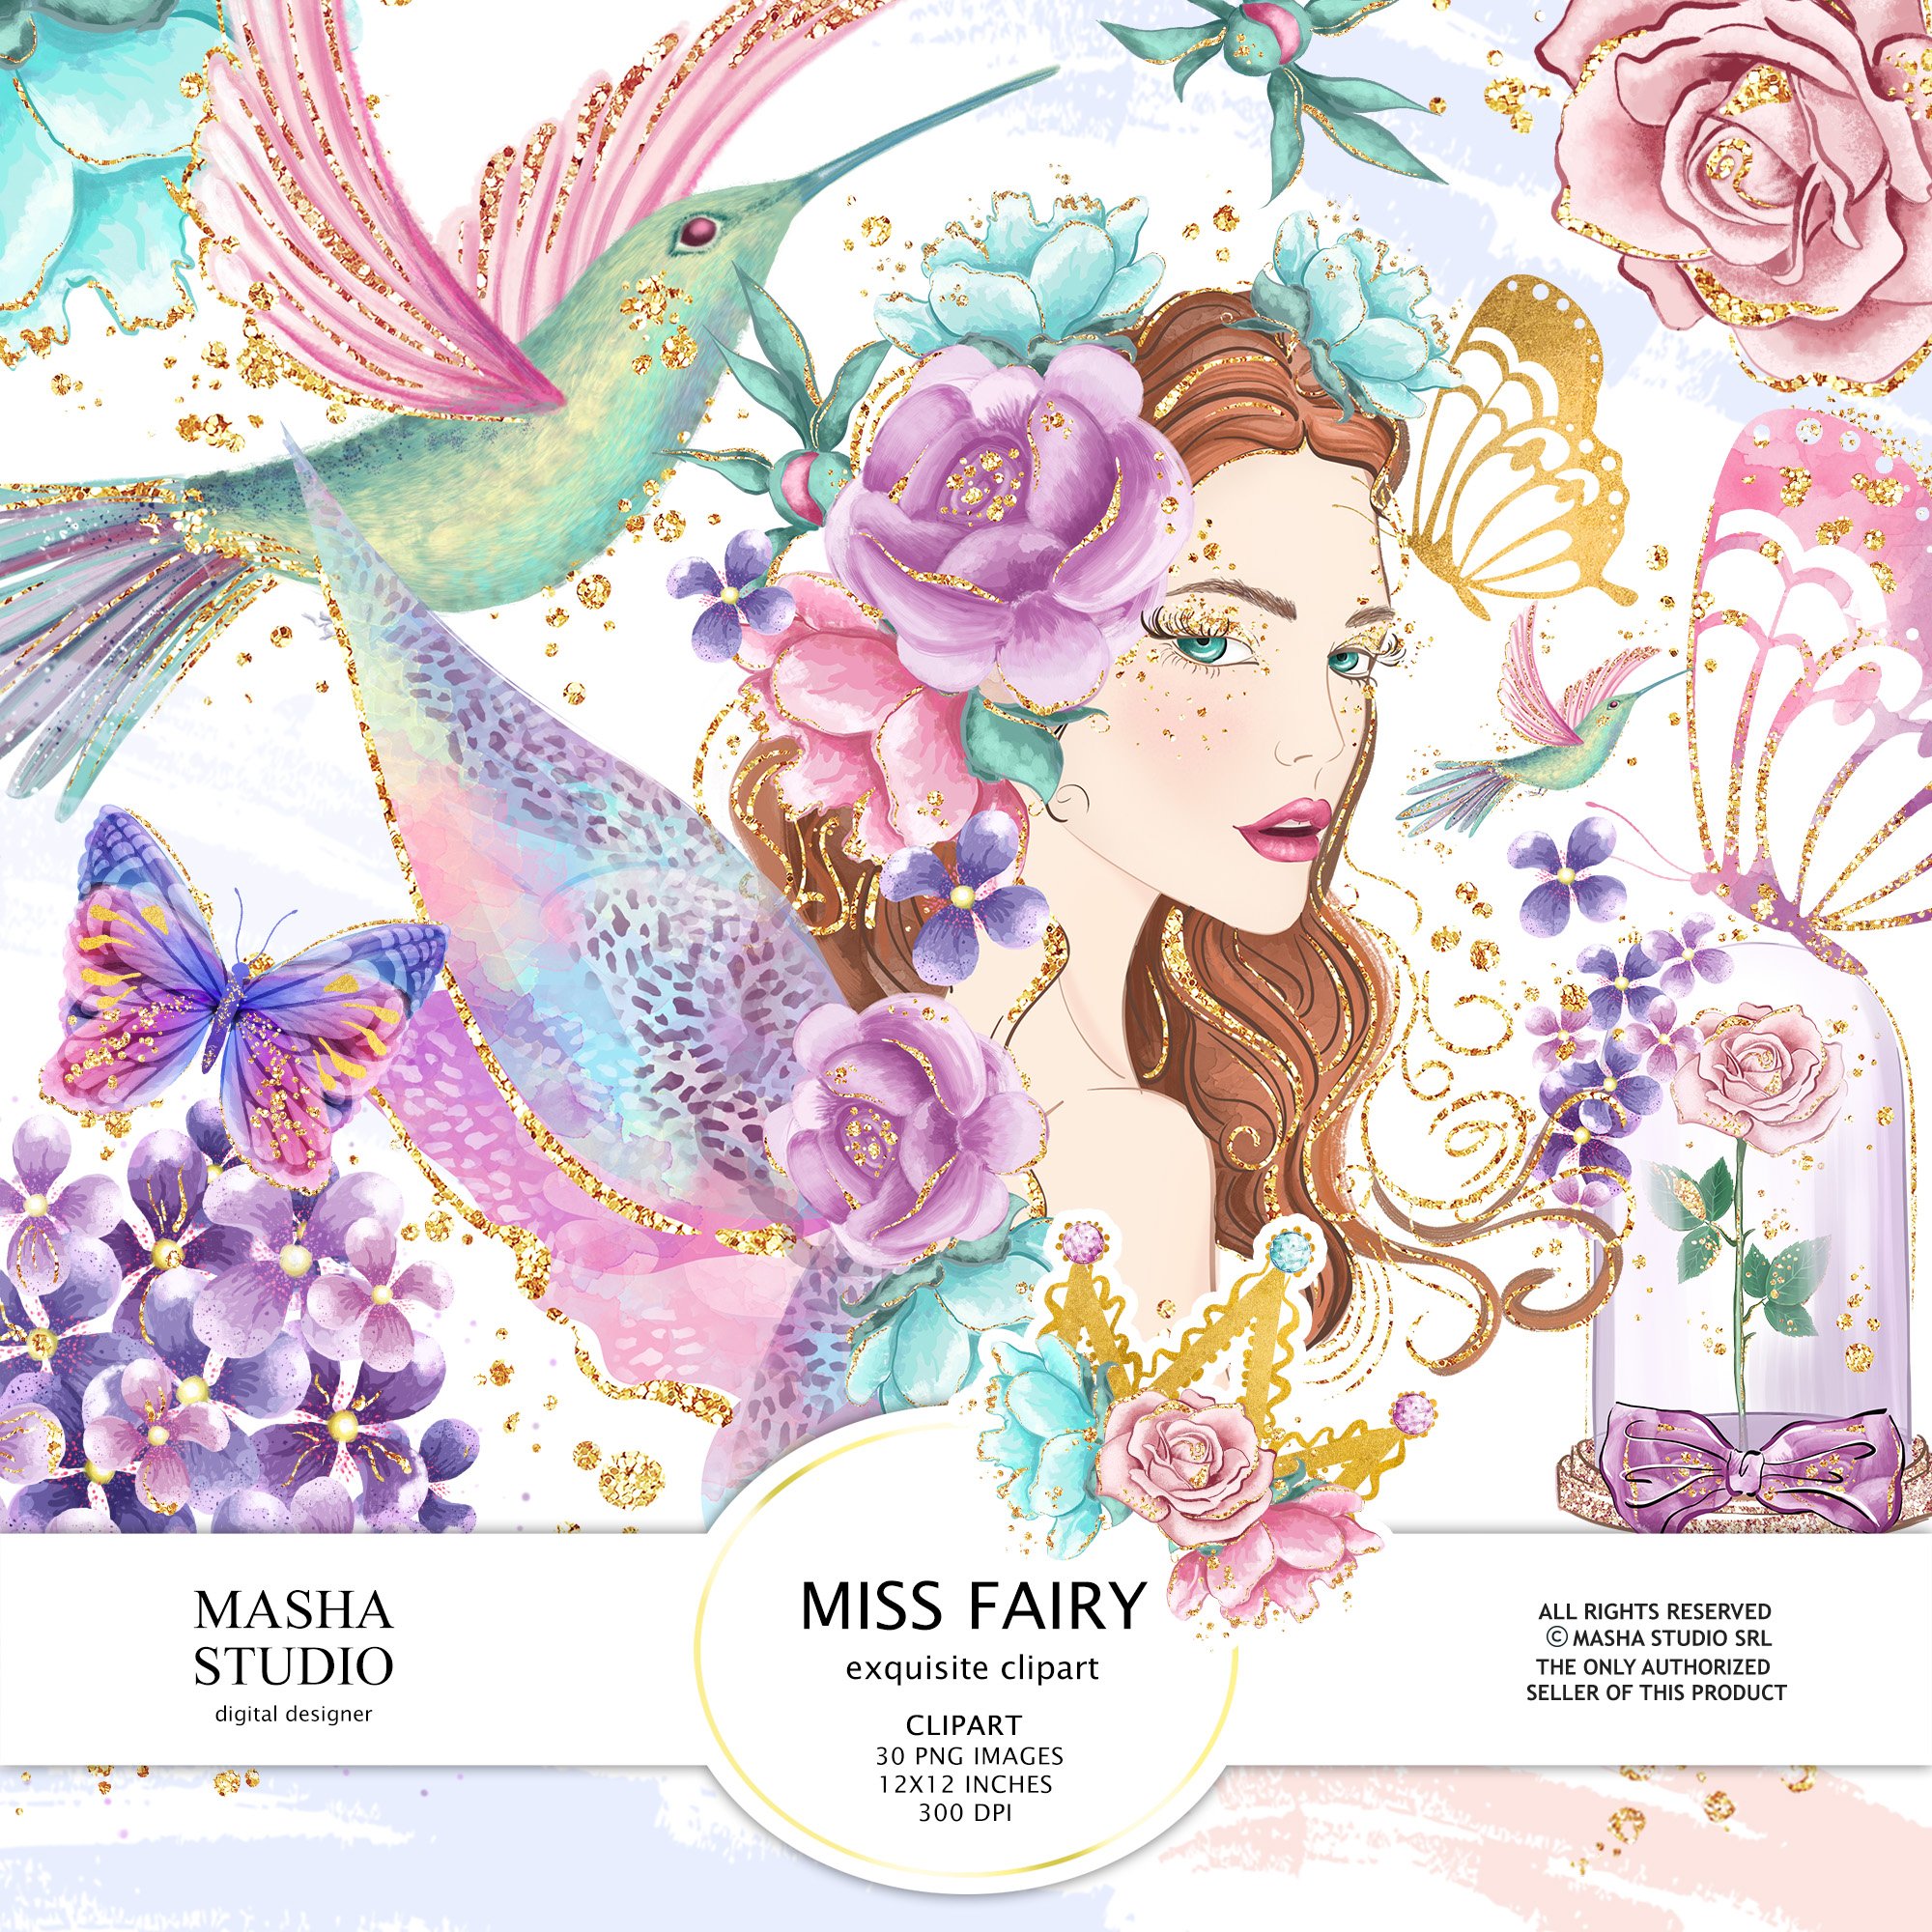 MISS FAIRY Clipart cover image.